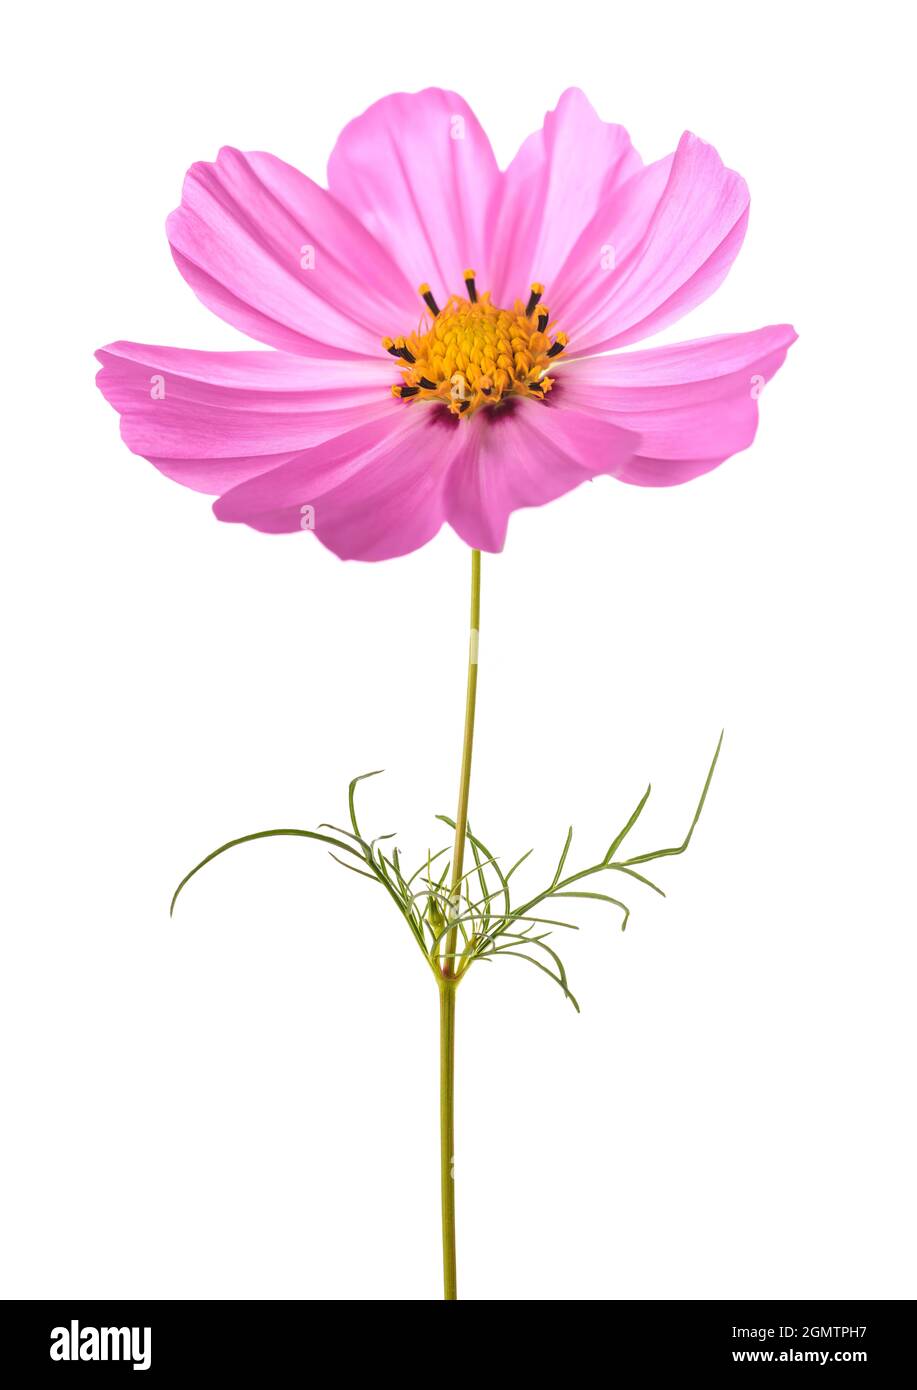 Pink garden cosmos flower isolated on white Stock Photo